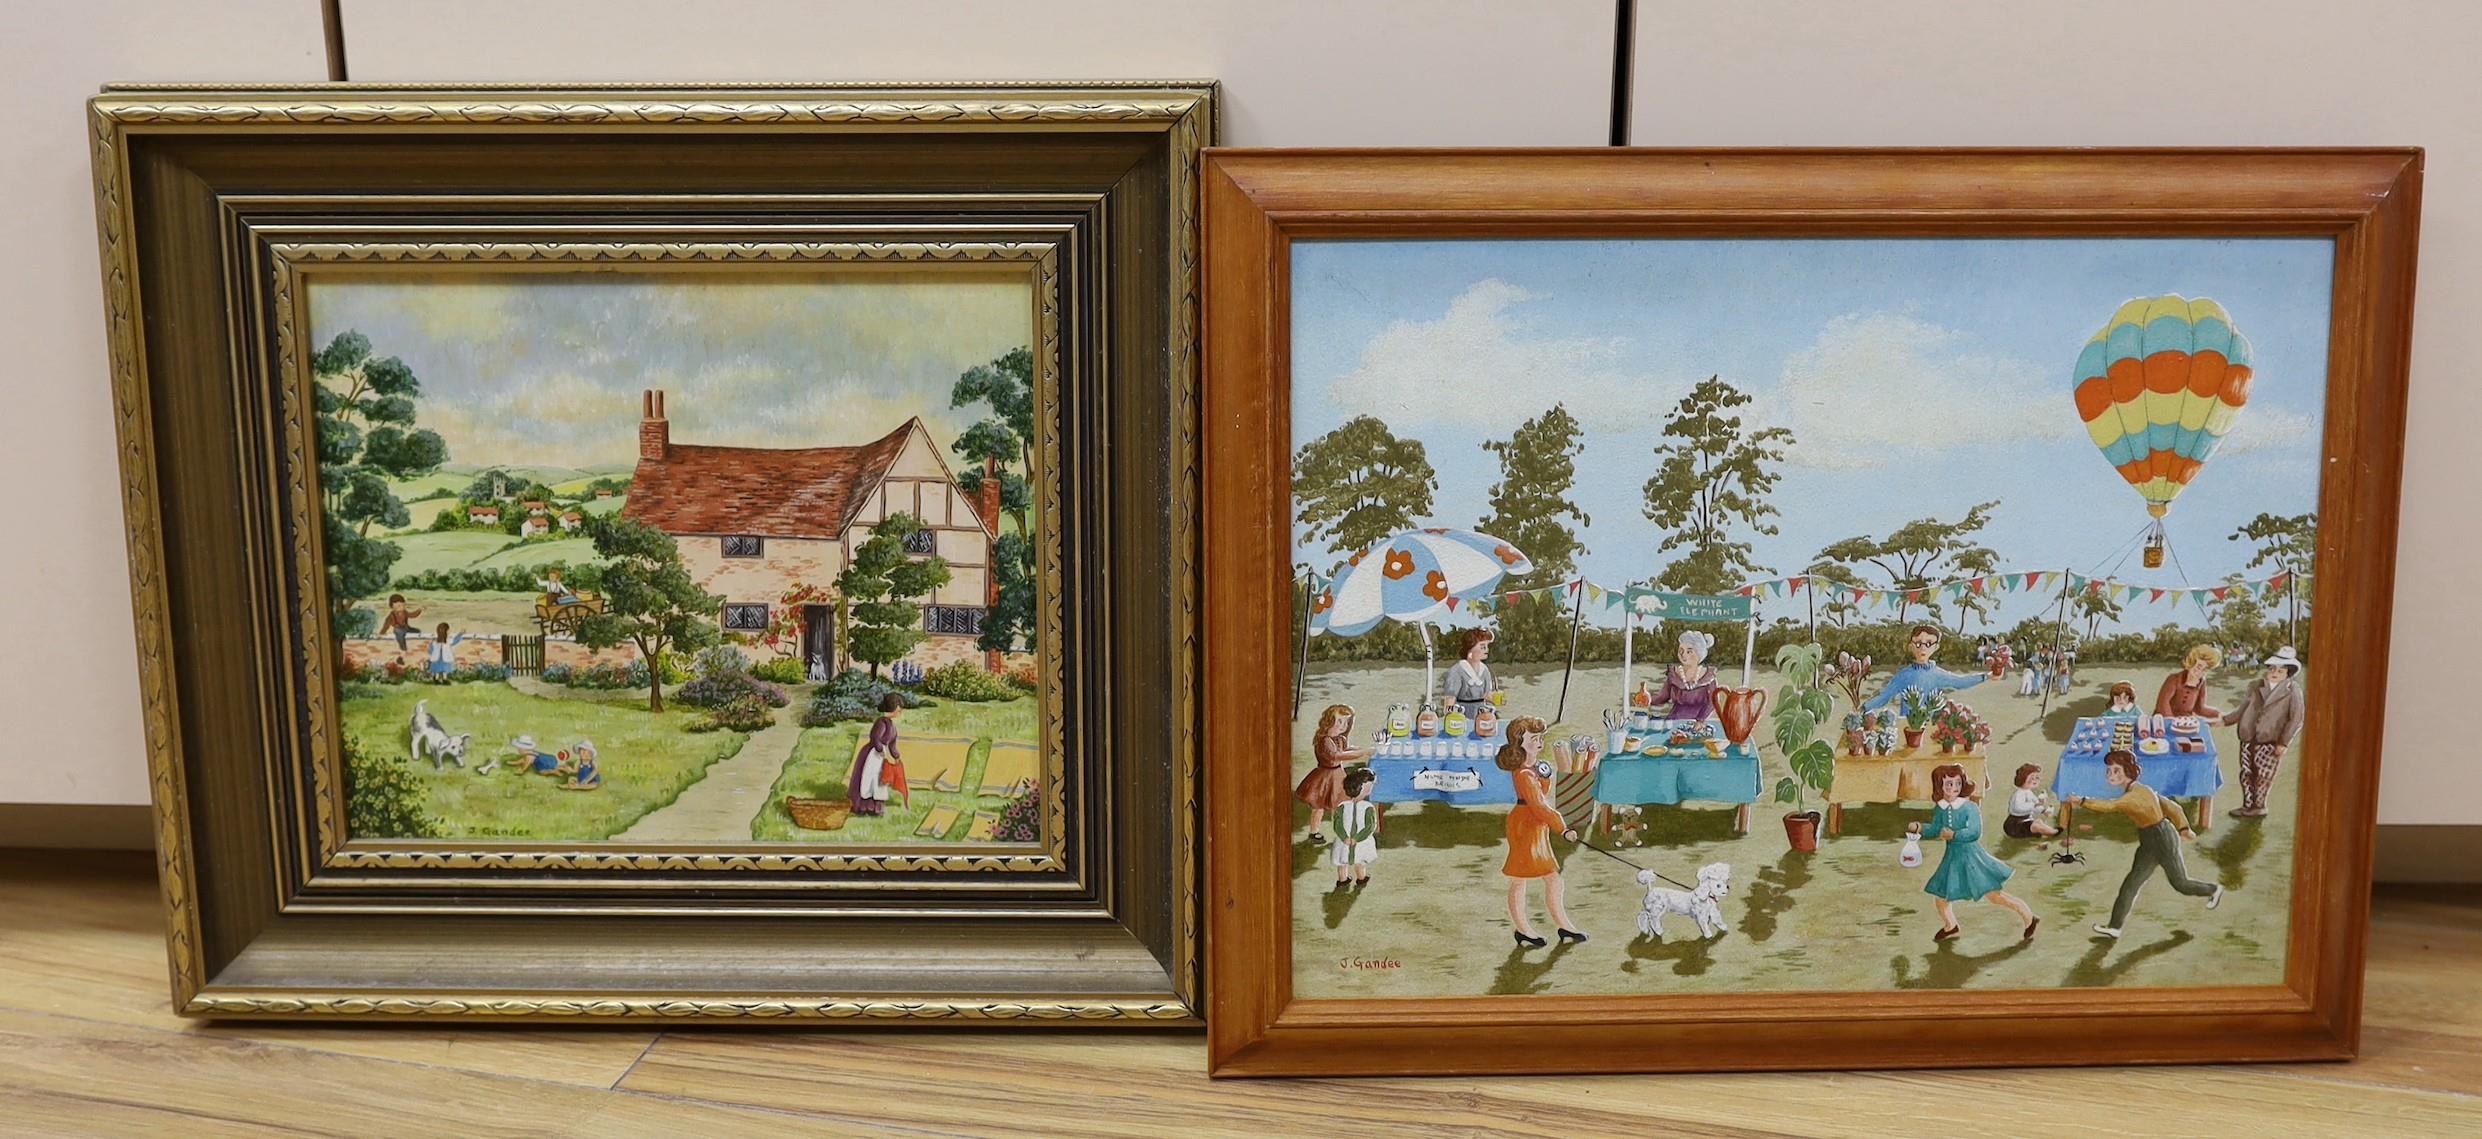 Joyce Gandee, two oils on board, 'Cottage Garden scene' and 'The Village Fete', 23 x 29cm and 30 x